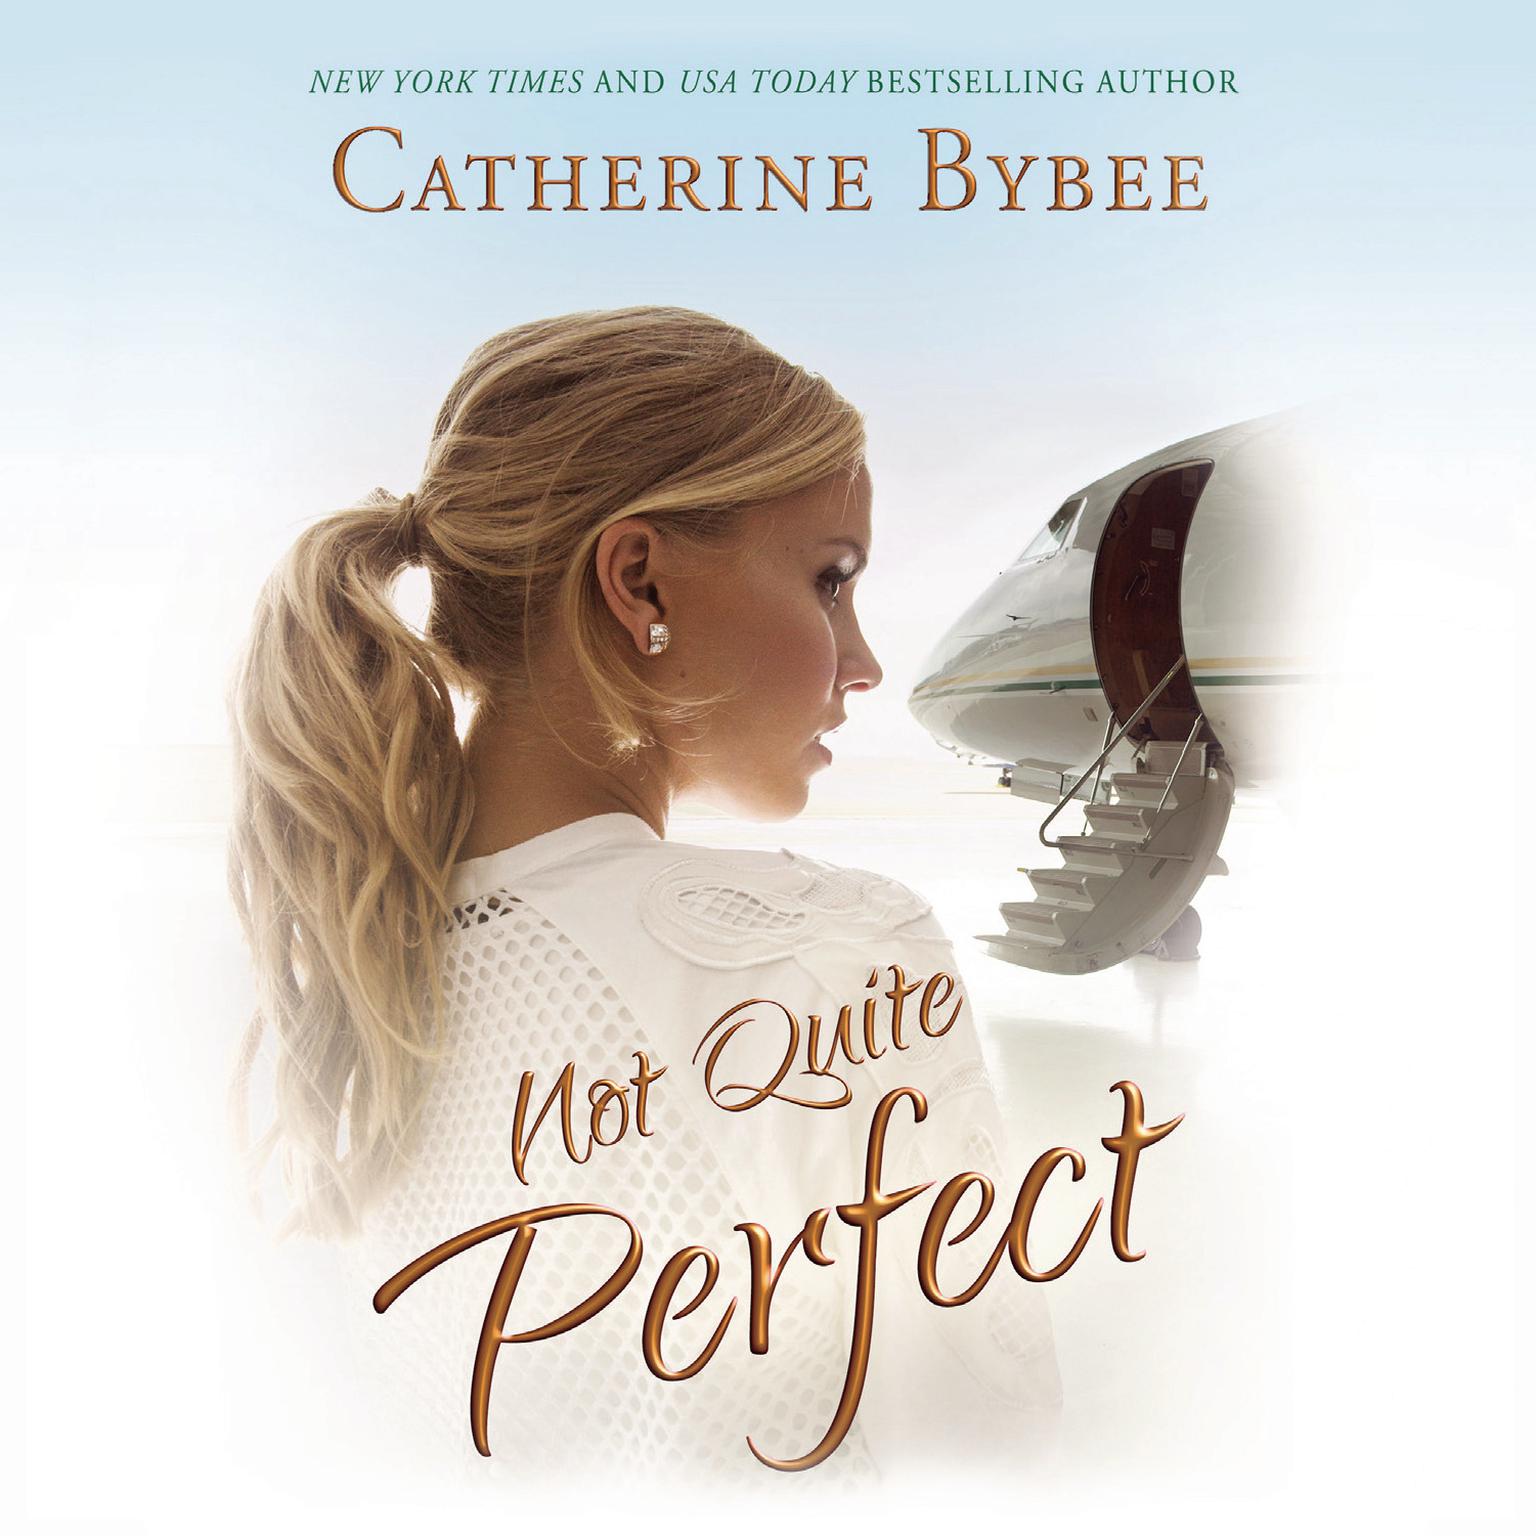 Not Quite Perfect Audiobook, by Catherine Bybee